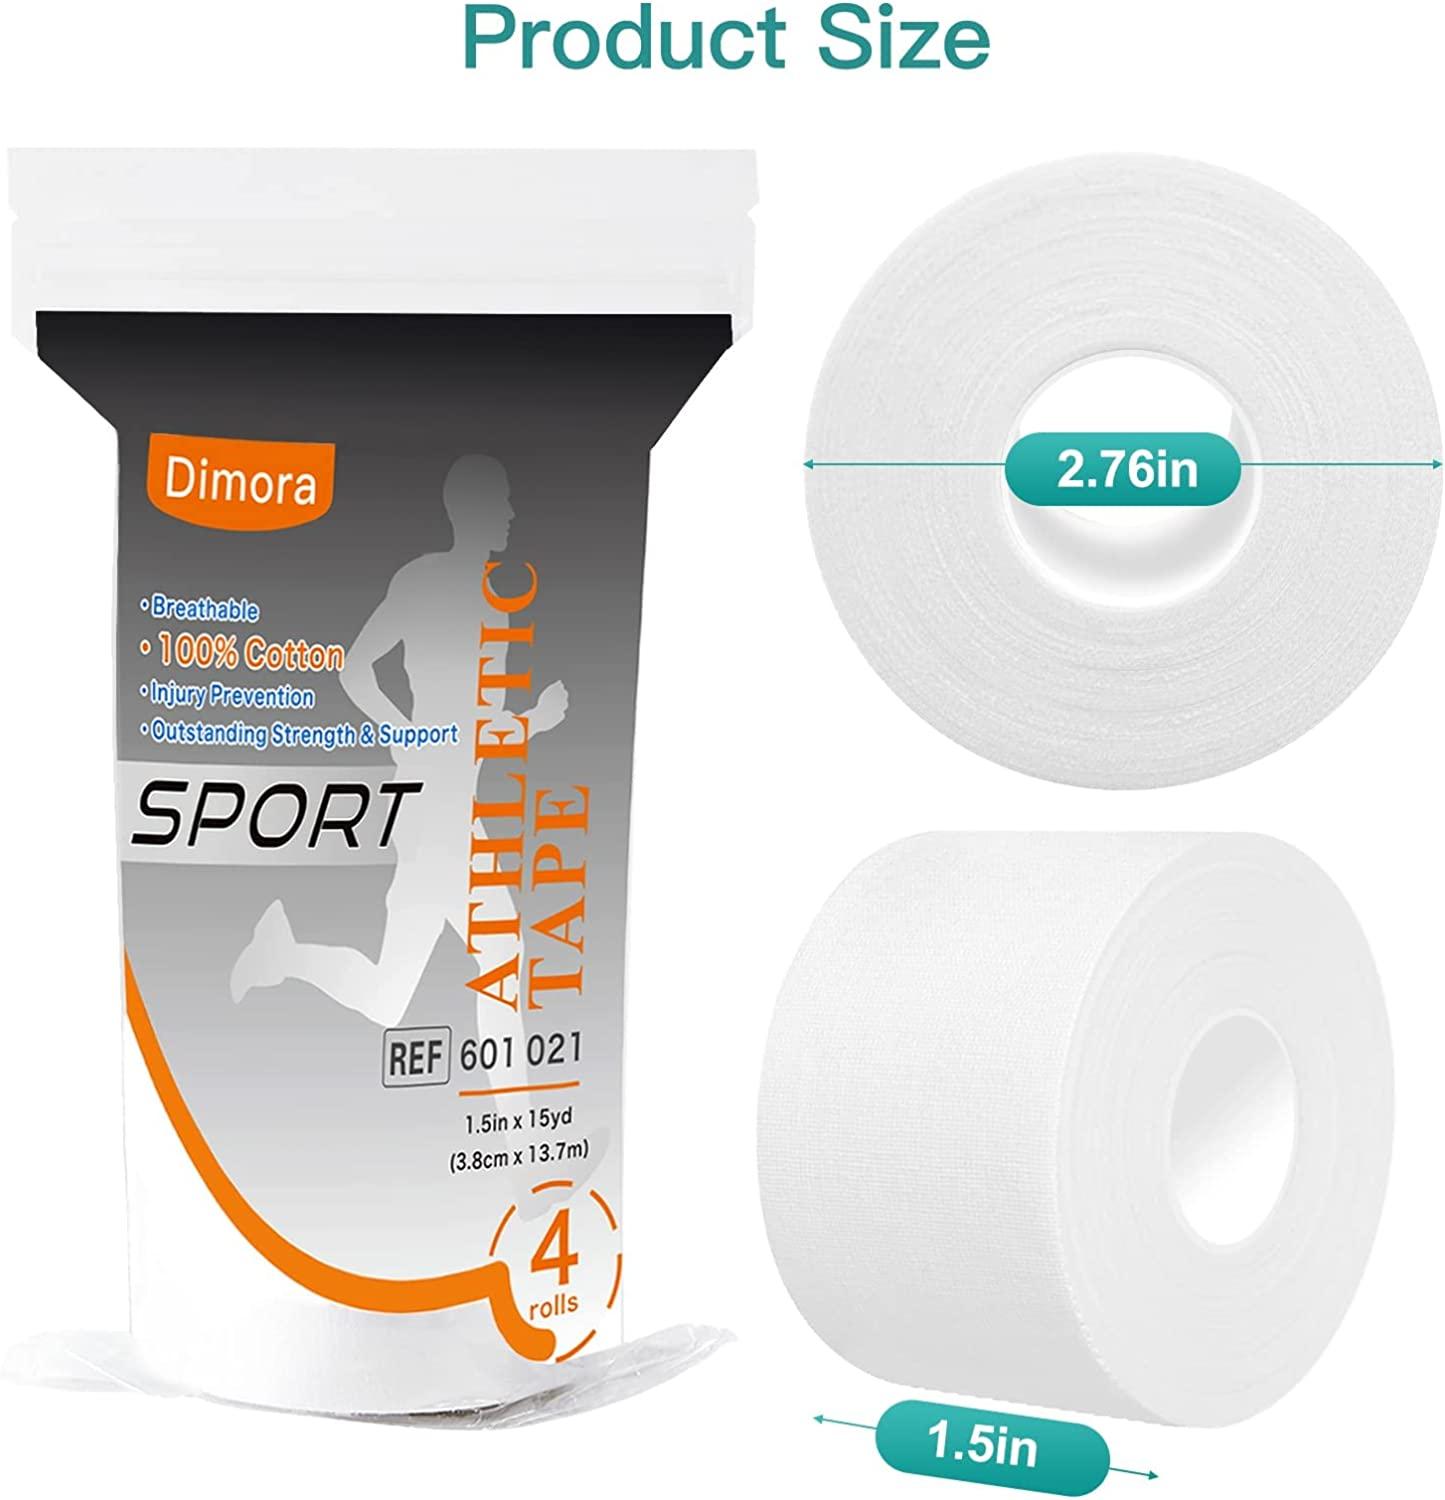 Buy Pro's Choice White Athletic Tape at Medical Monks!